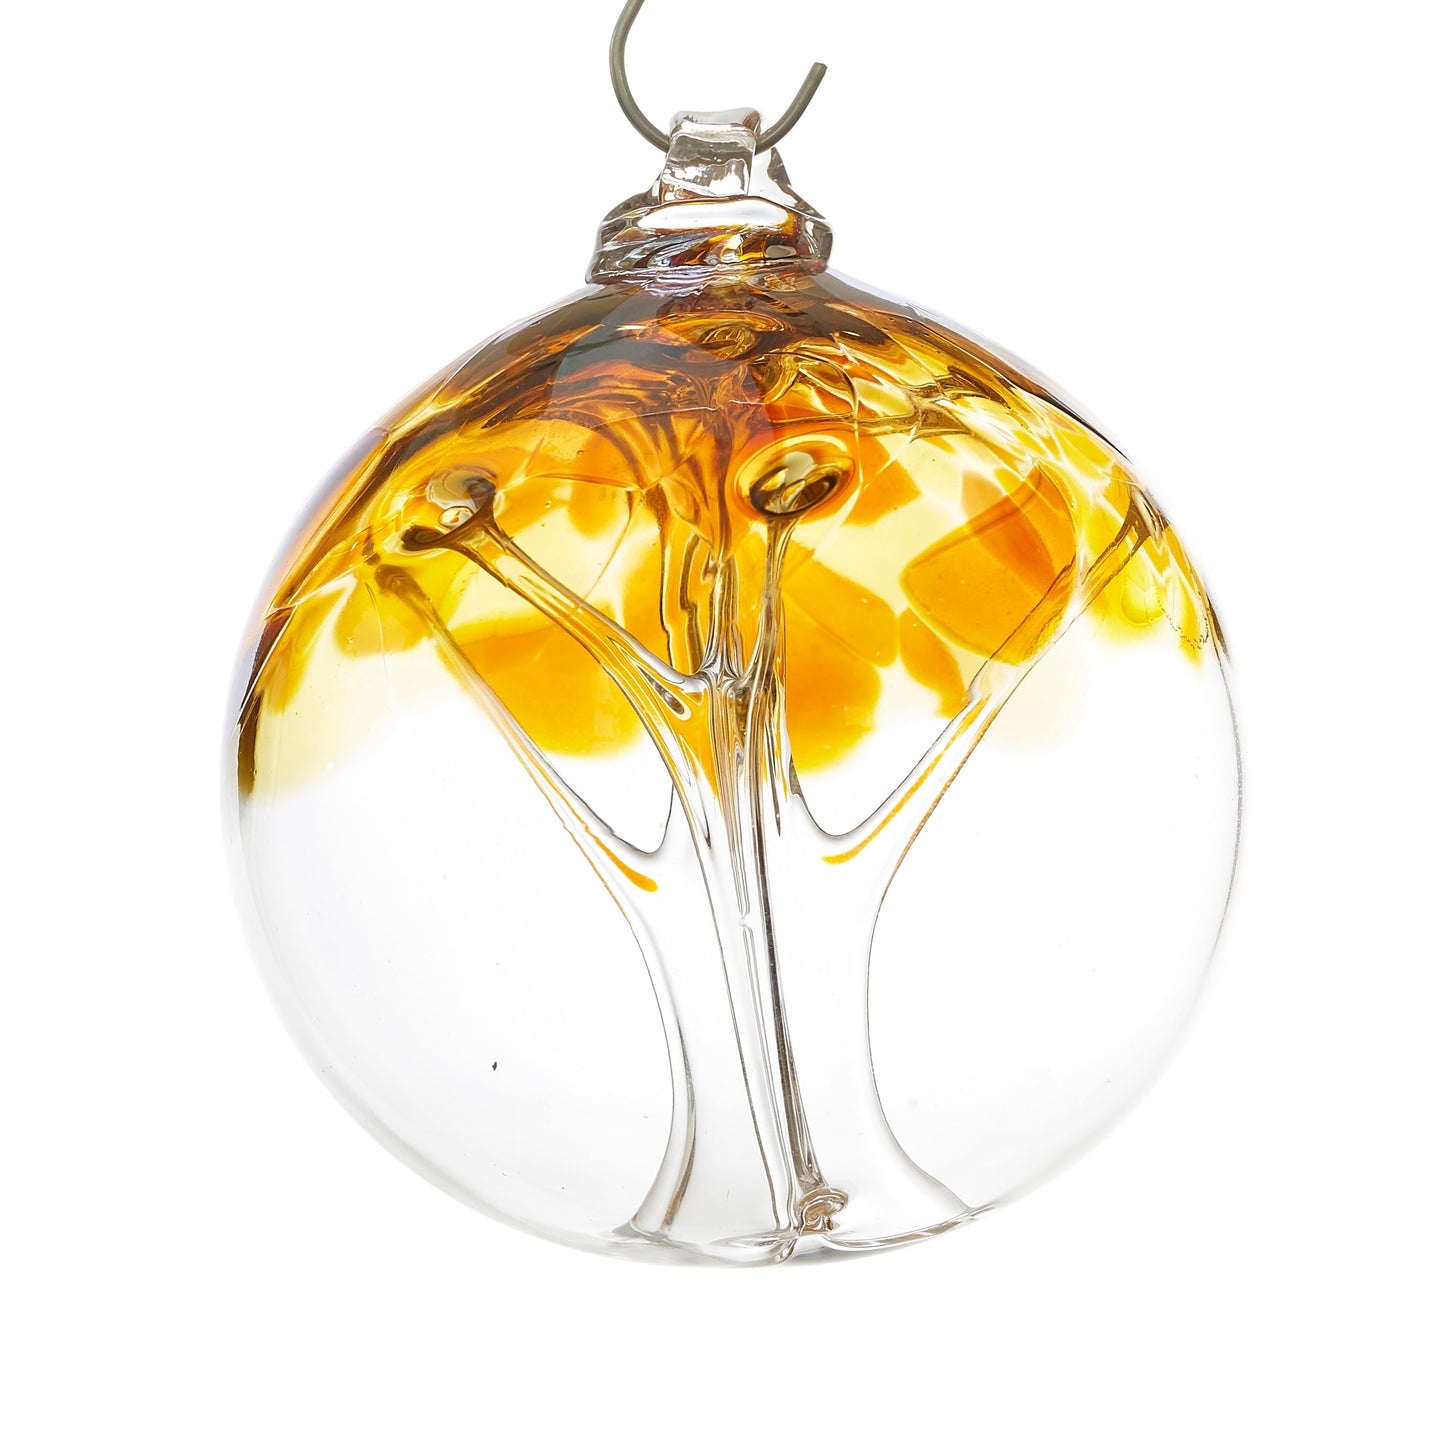 Memorial glass art tree of life ball with cremation ash. Iris gold glass.